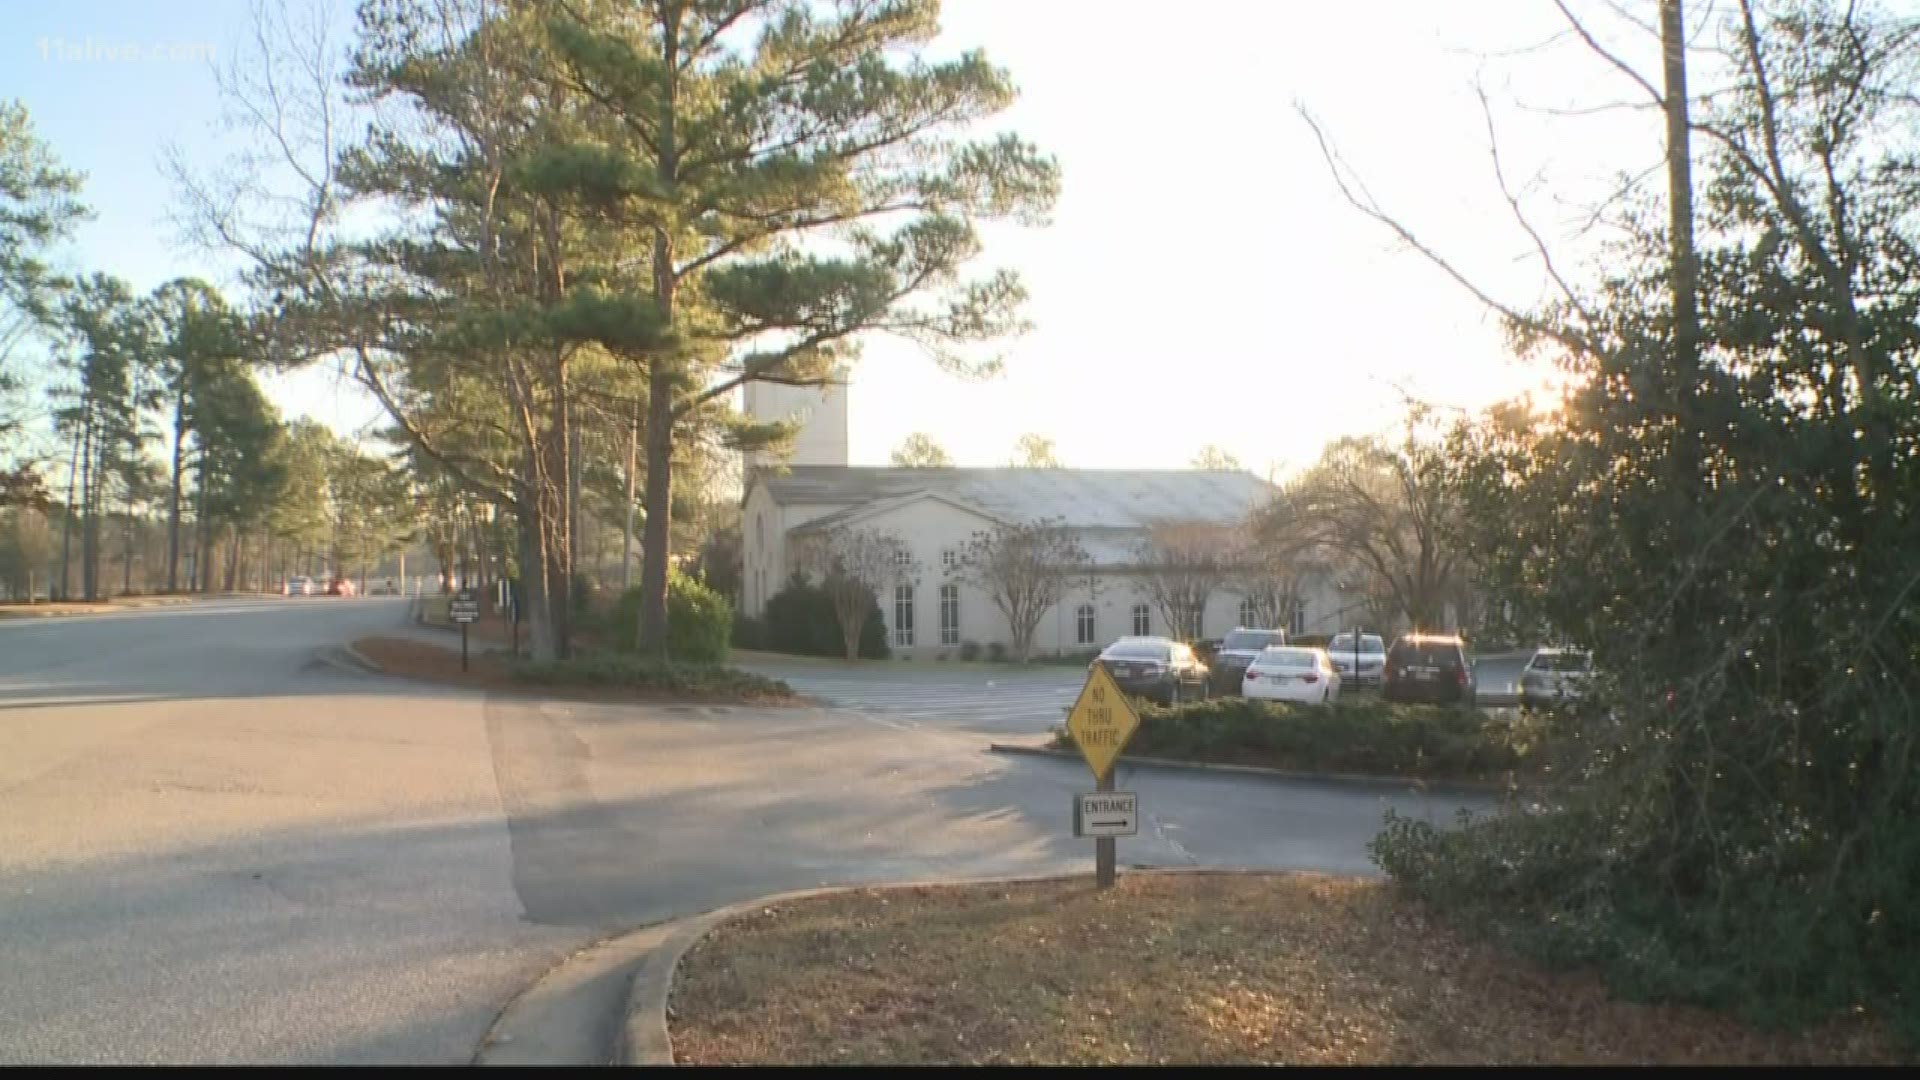 An assault rifle was found hidden under a jacket inside the chapel at a church in Peachtree City late Saturday, police said.